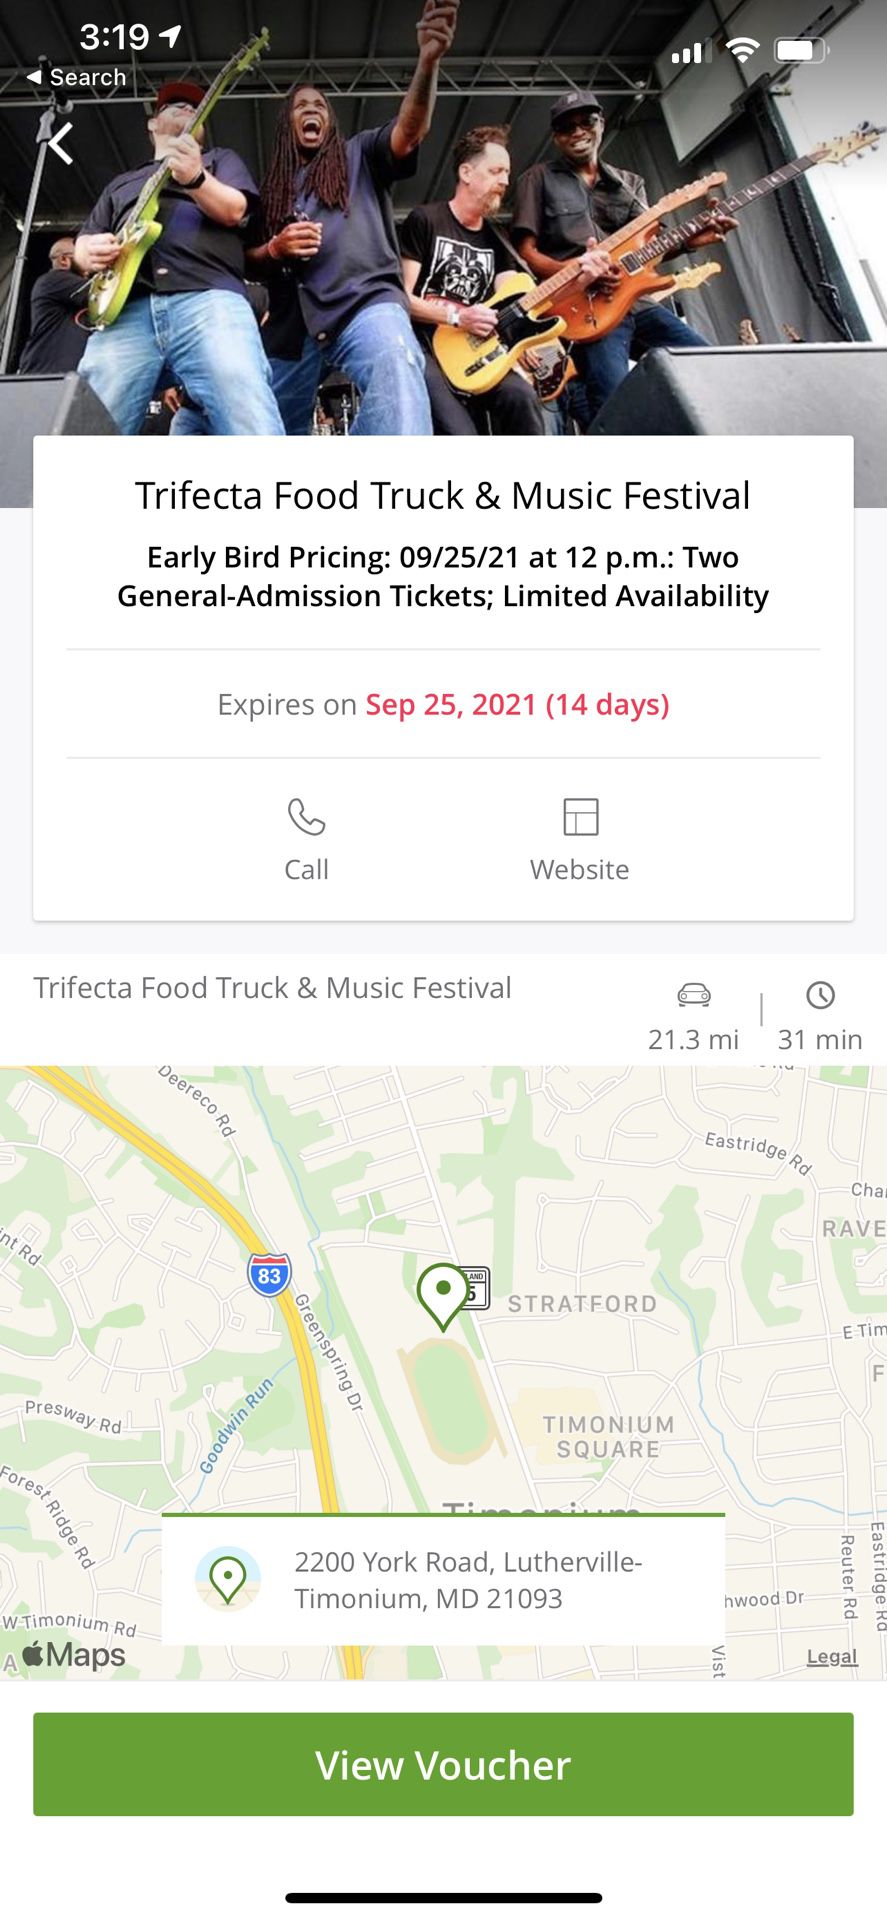 Trifecta Food Truck & Music Festival Tickets For 2